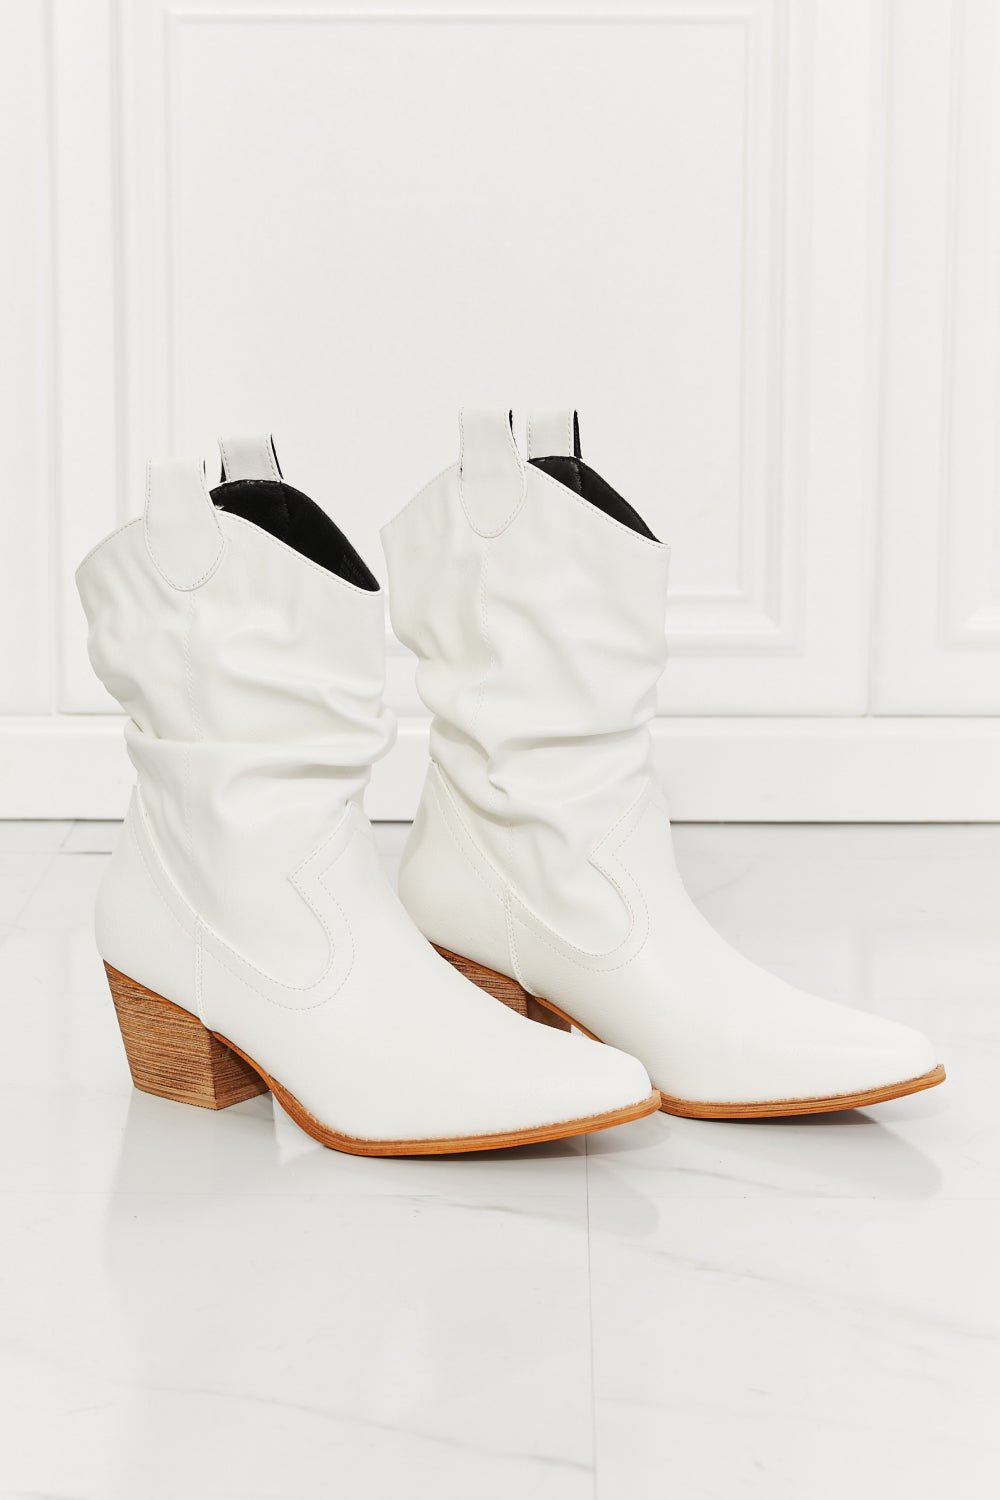 Vegan Leather Scrunch Cowgirl Boots in WhiteCowboy BootsMelody